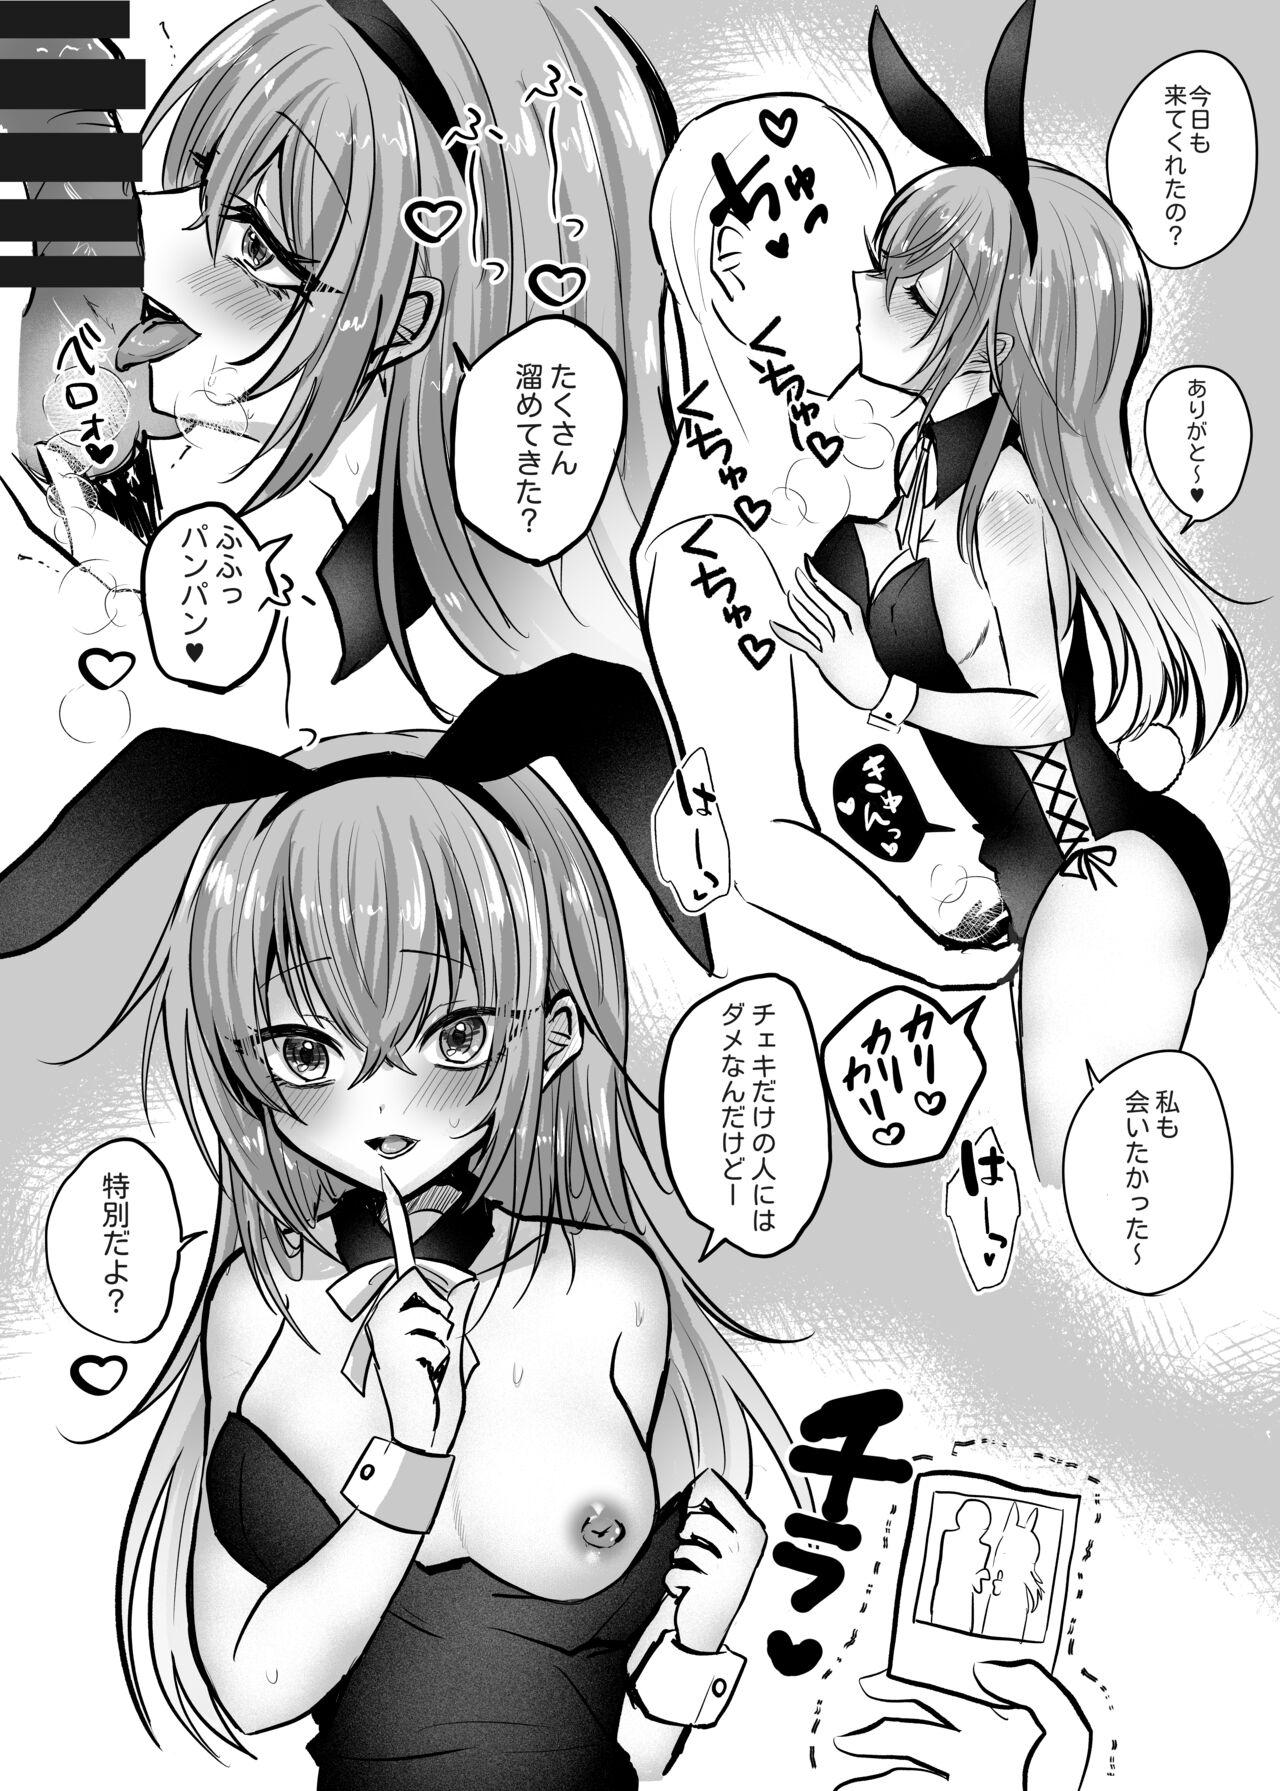 Action CoMETIK Bunny♥ - The idolmaster Amatures Gone Wild - Picture 2